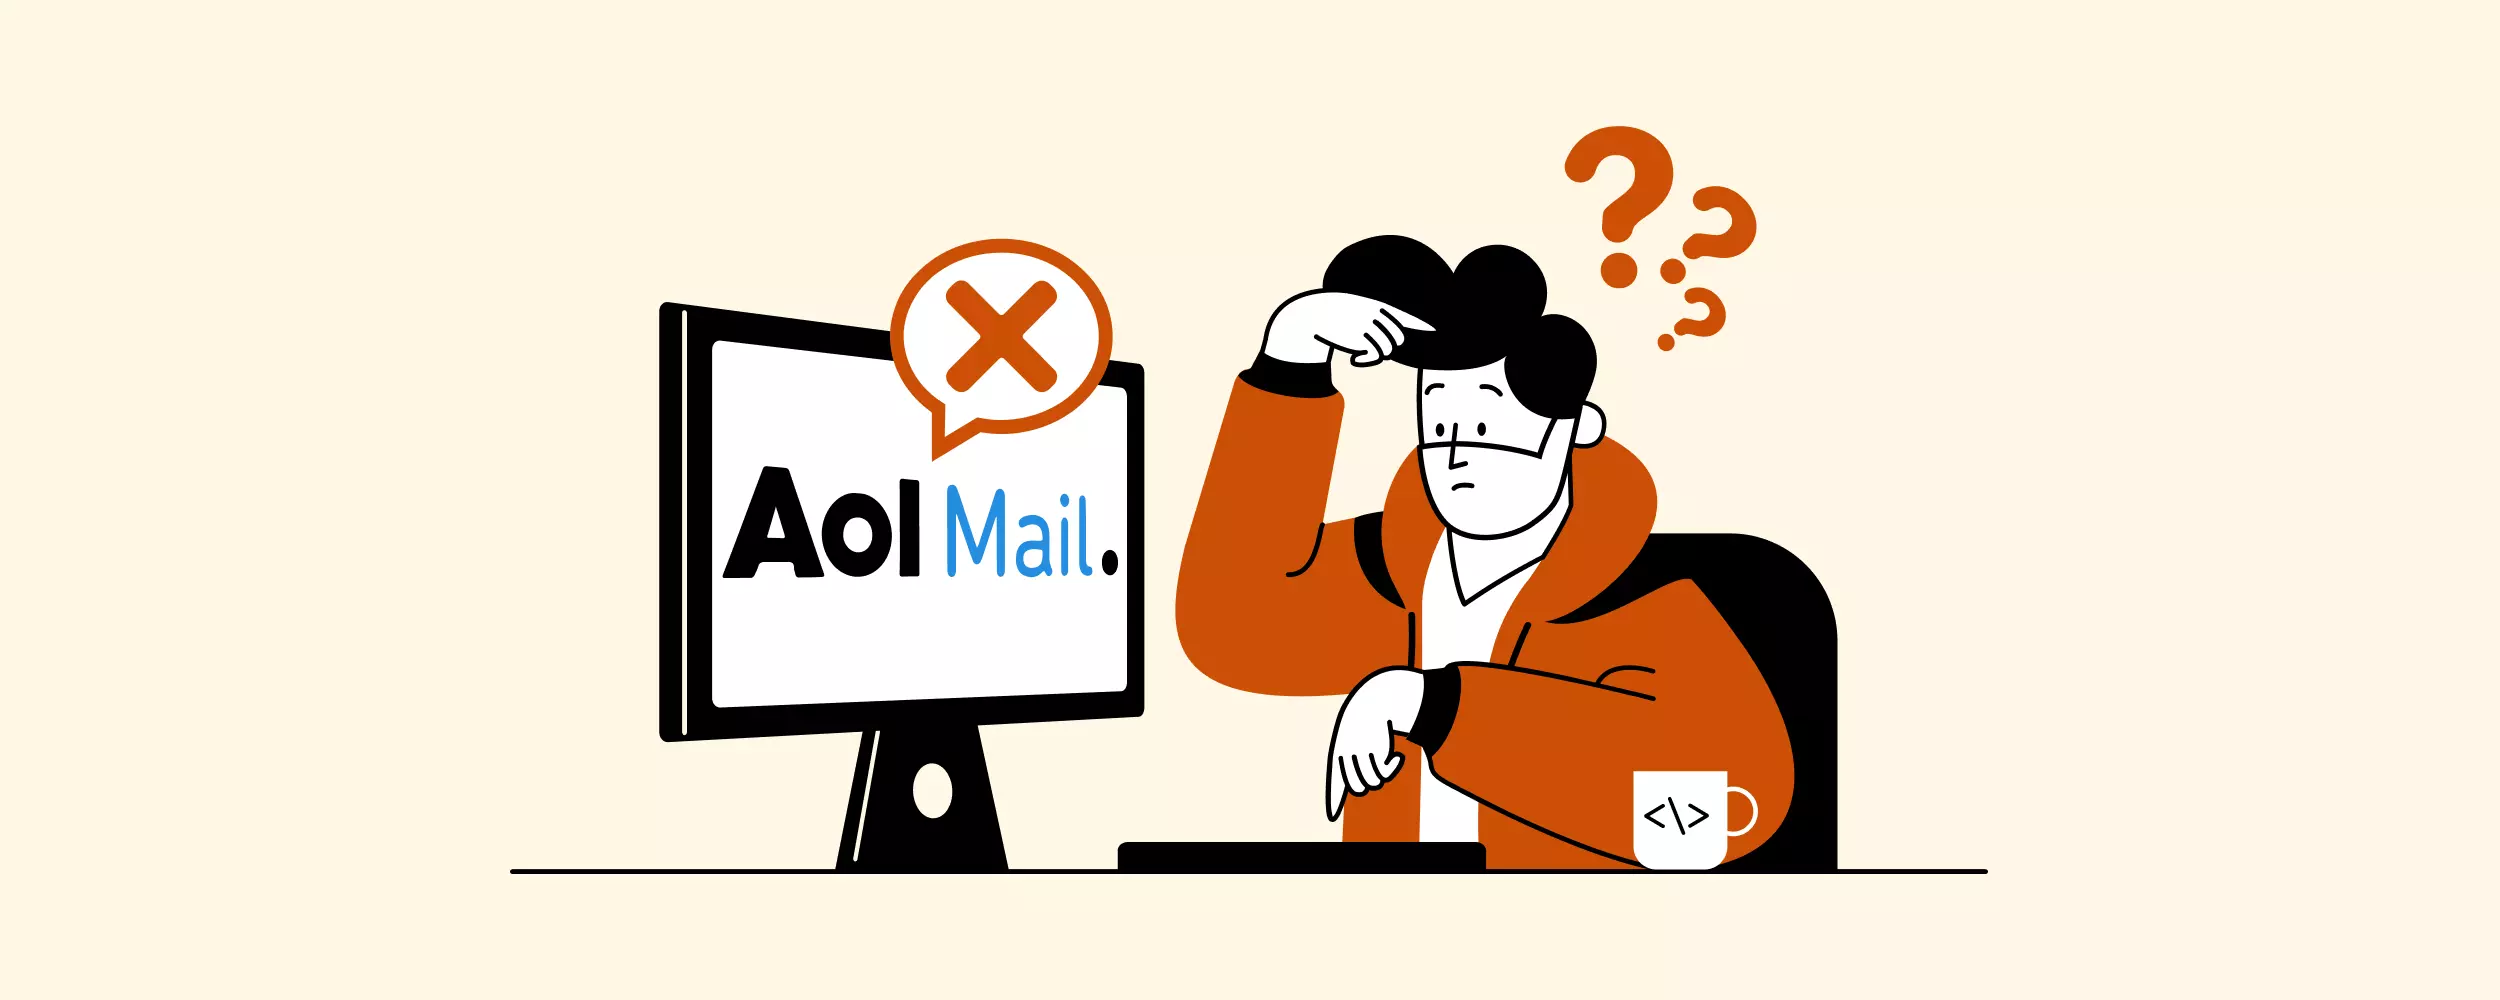 Is Your AOL Mail Not Working? Try These Troubleshooting Solutions